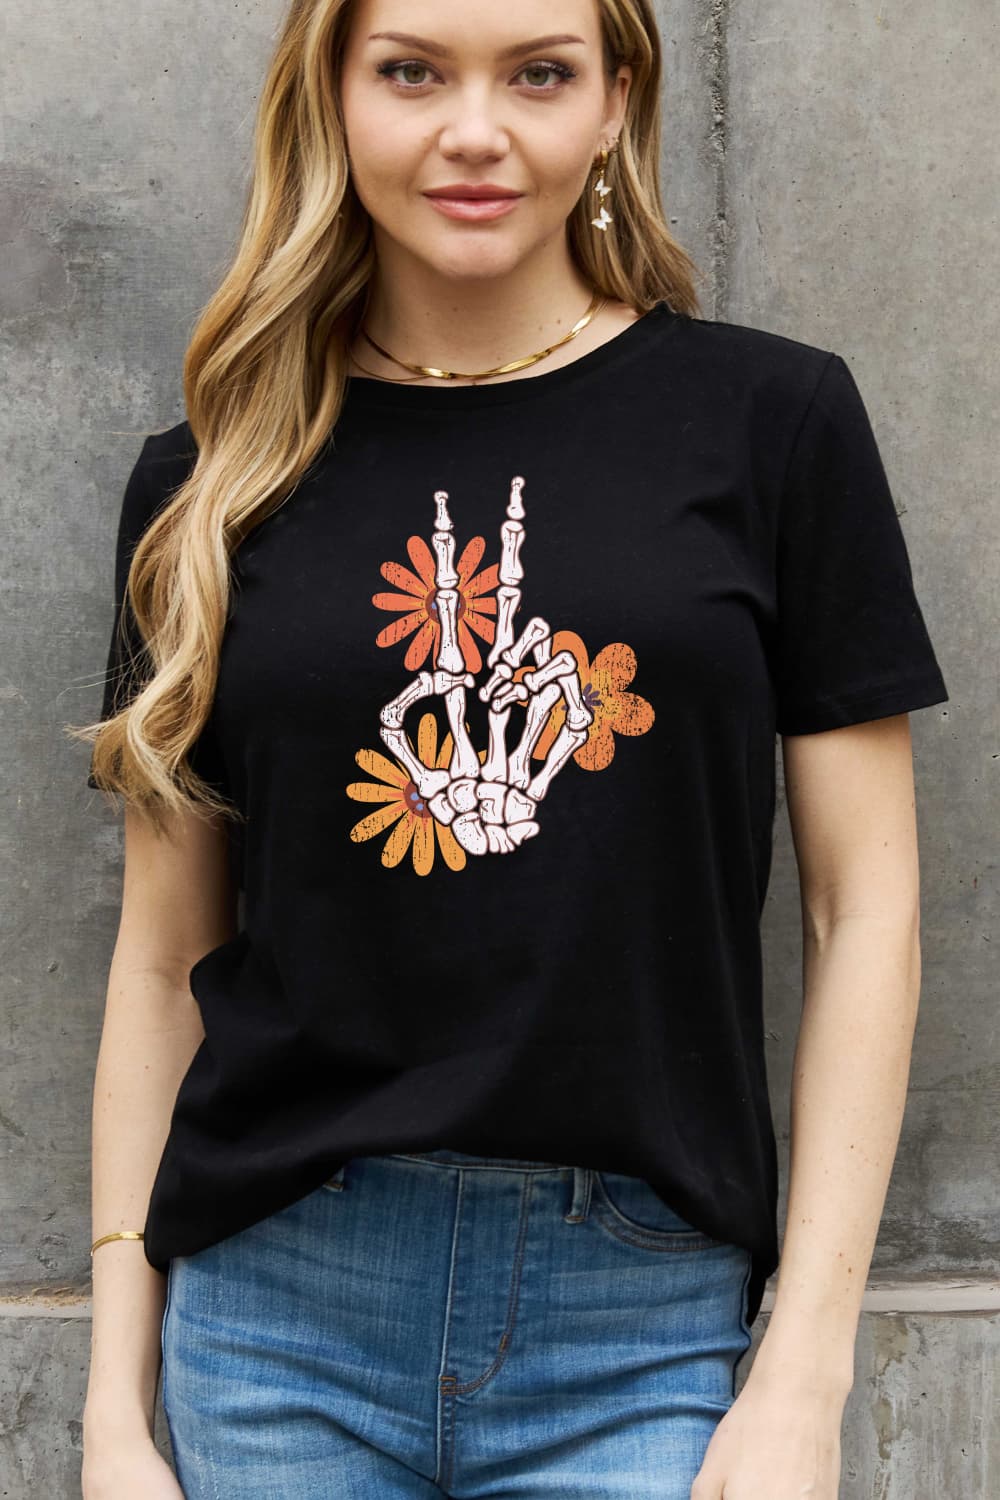 Simply Love Full Size Skeleton Hand Graphic Cotton Tee